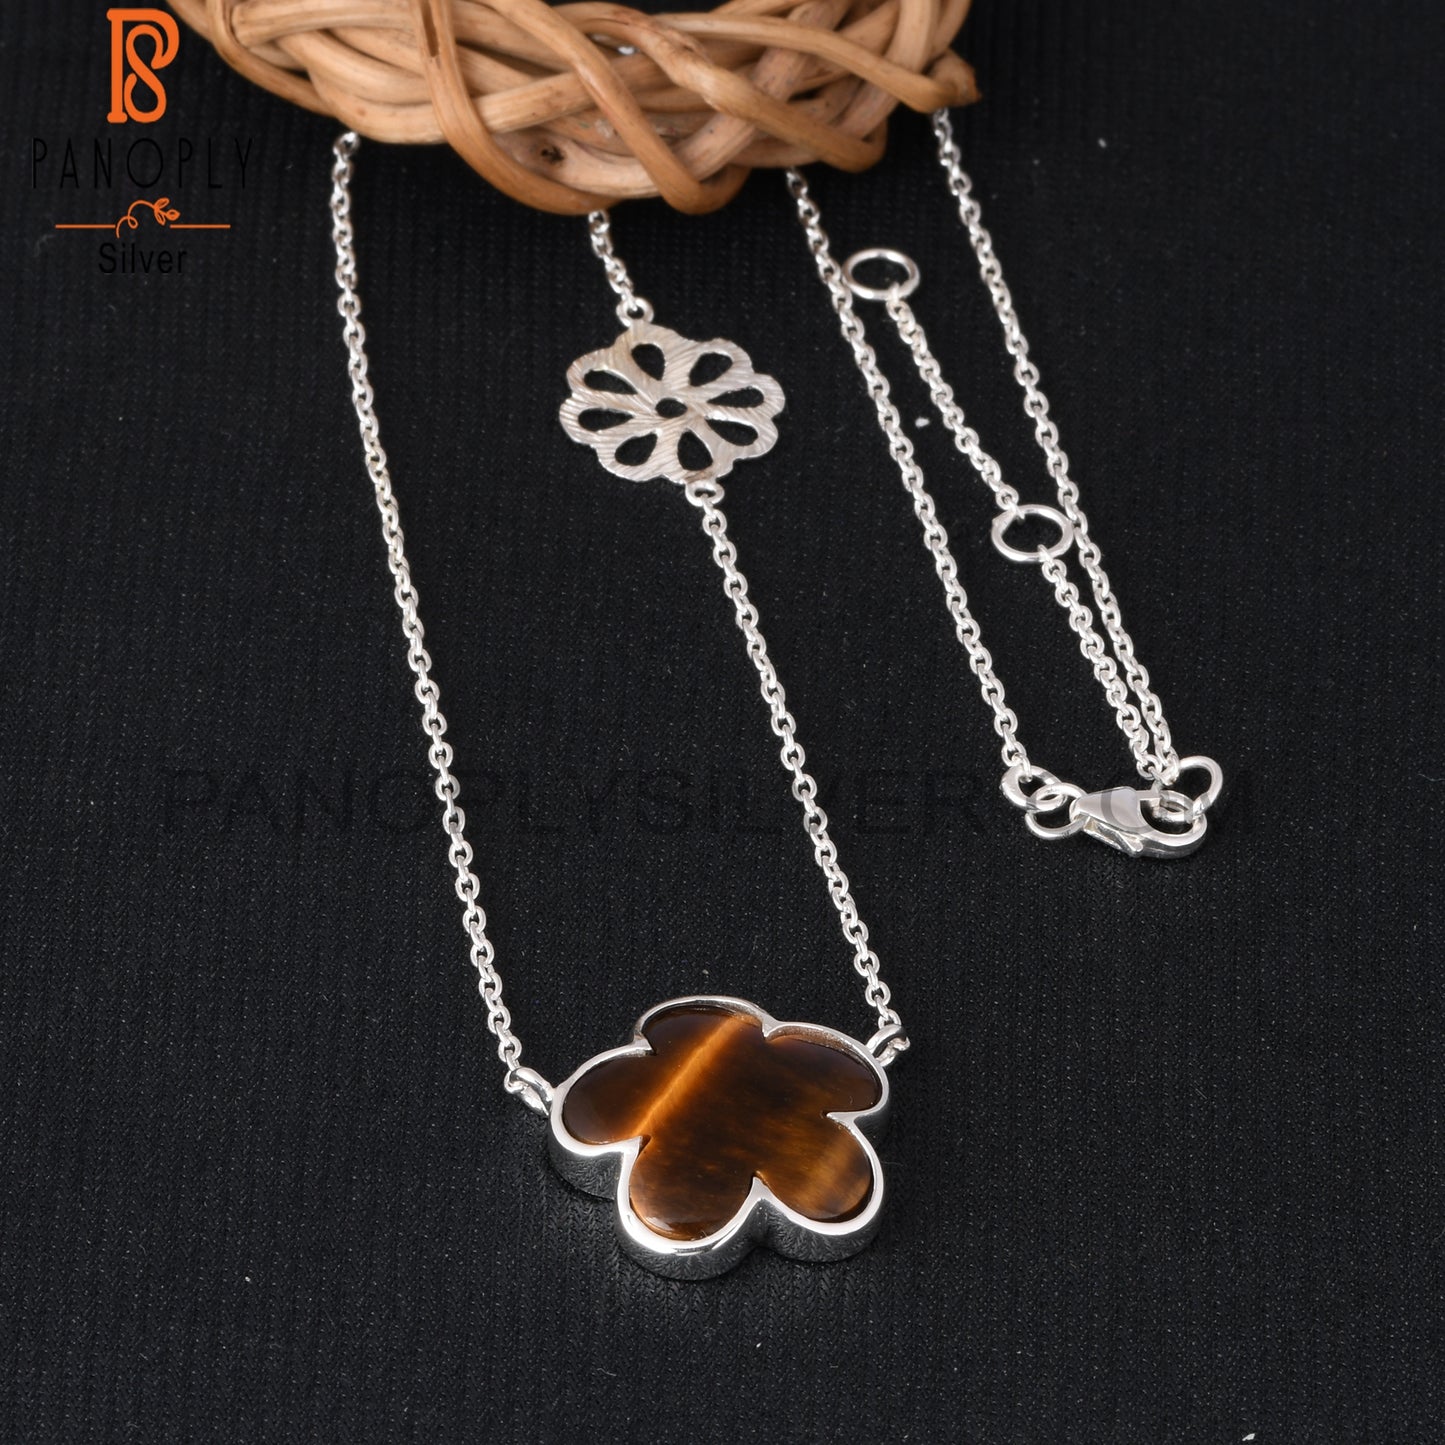 Tiger Eye Yellow Sunflower 925 Silver Pendant With Chain